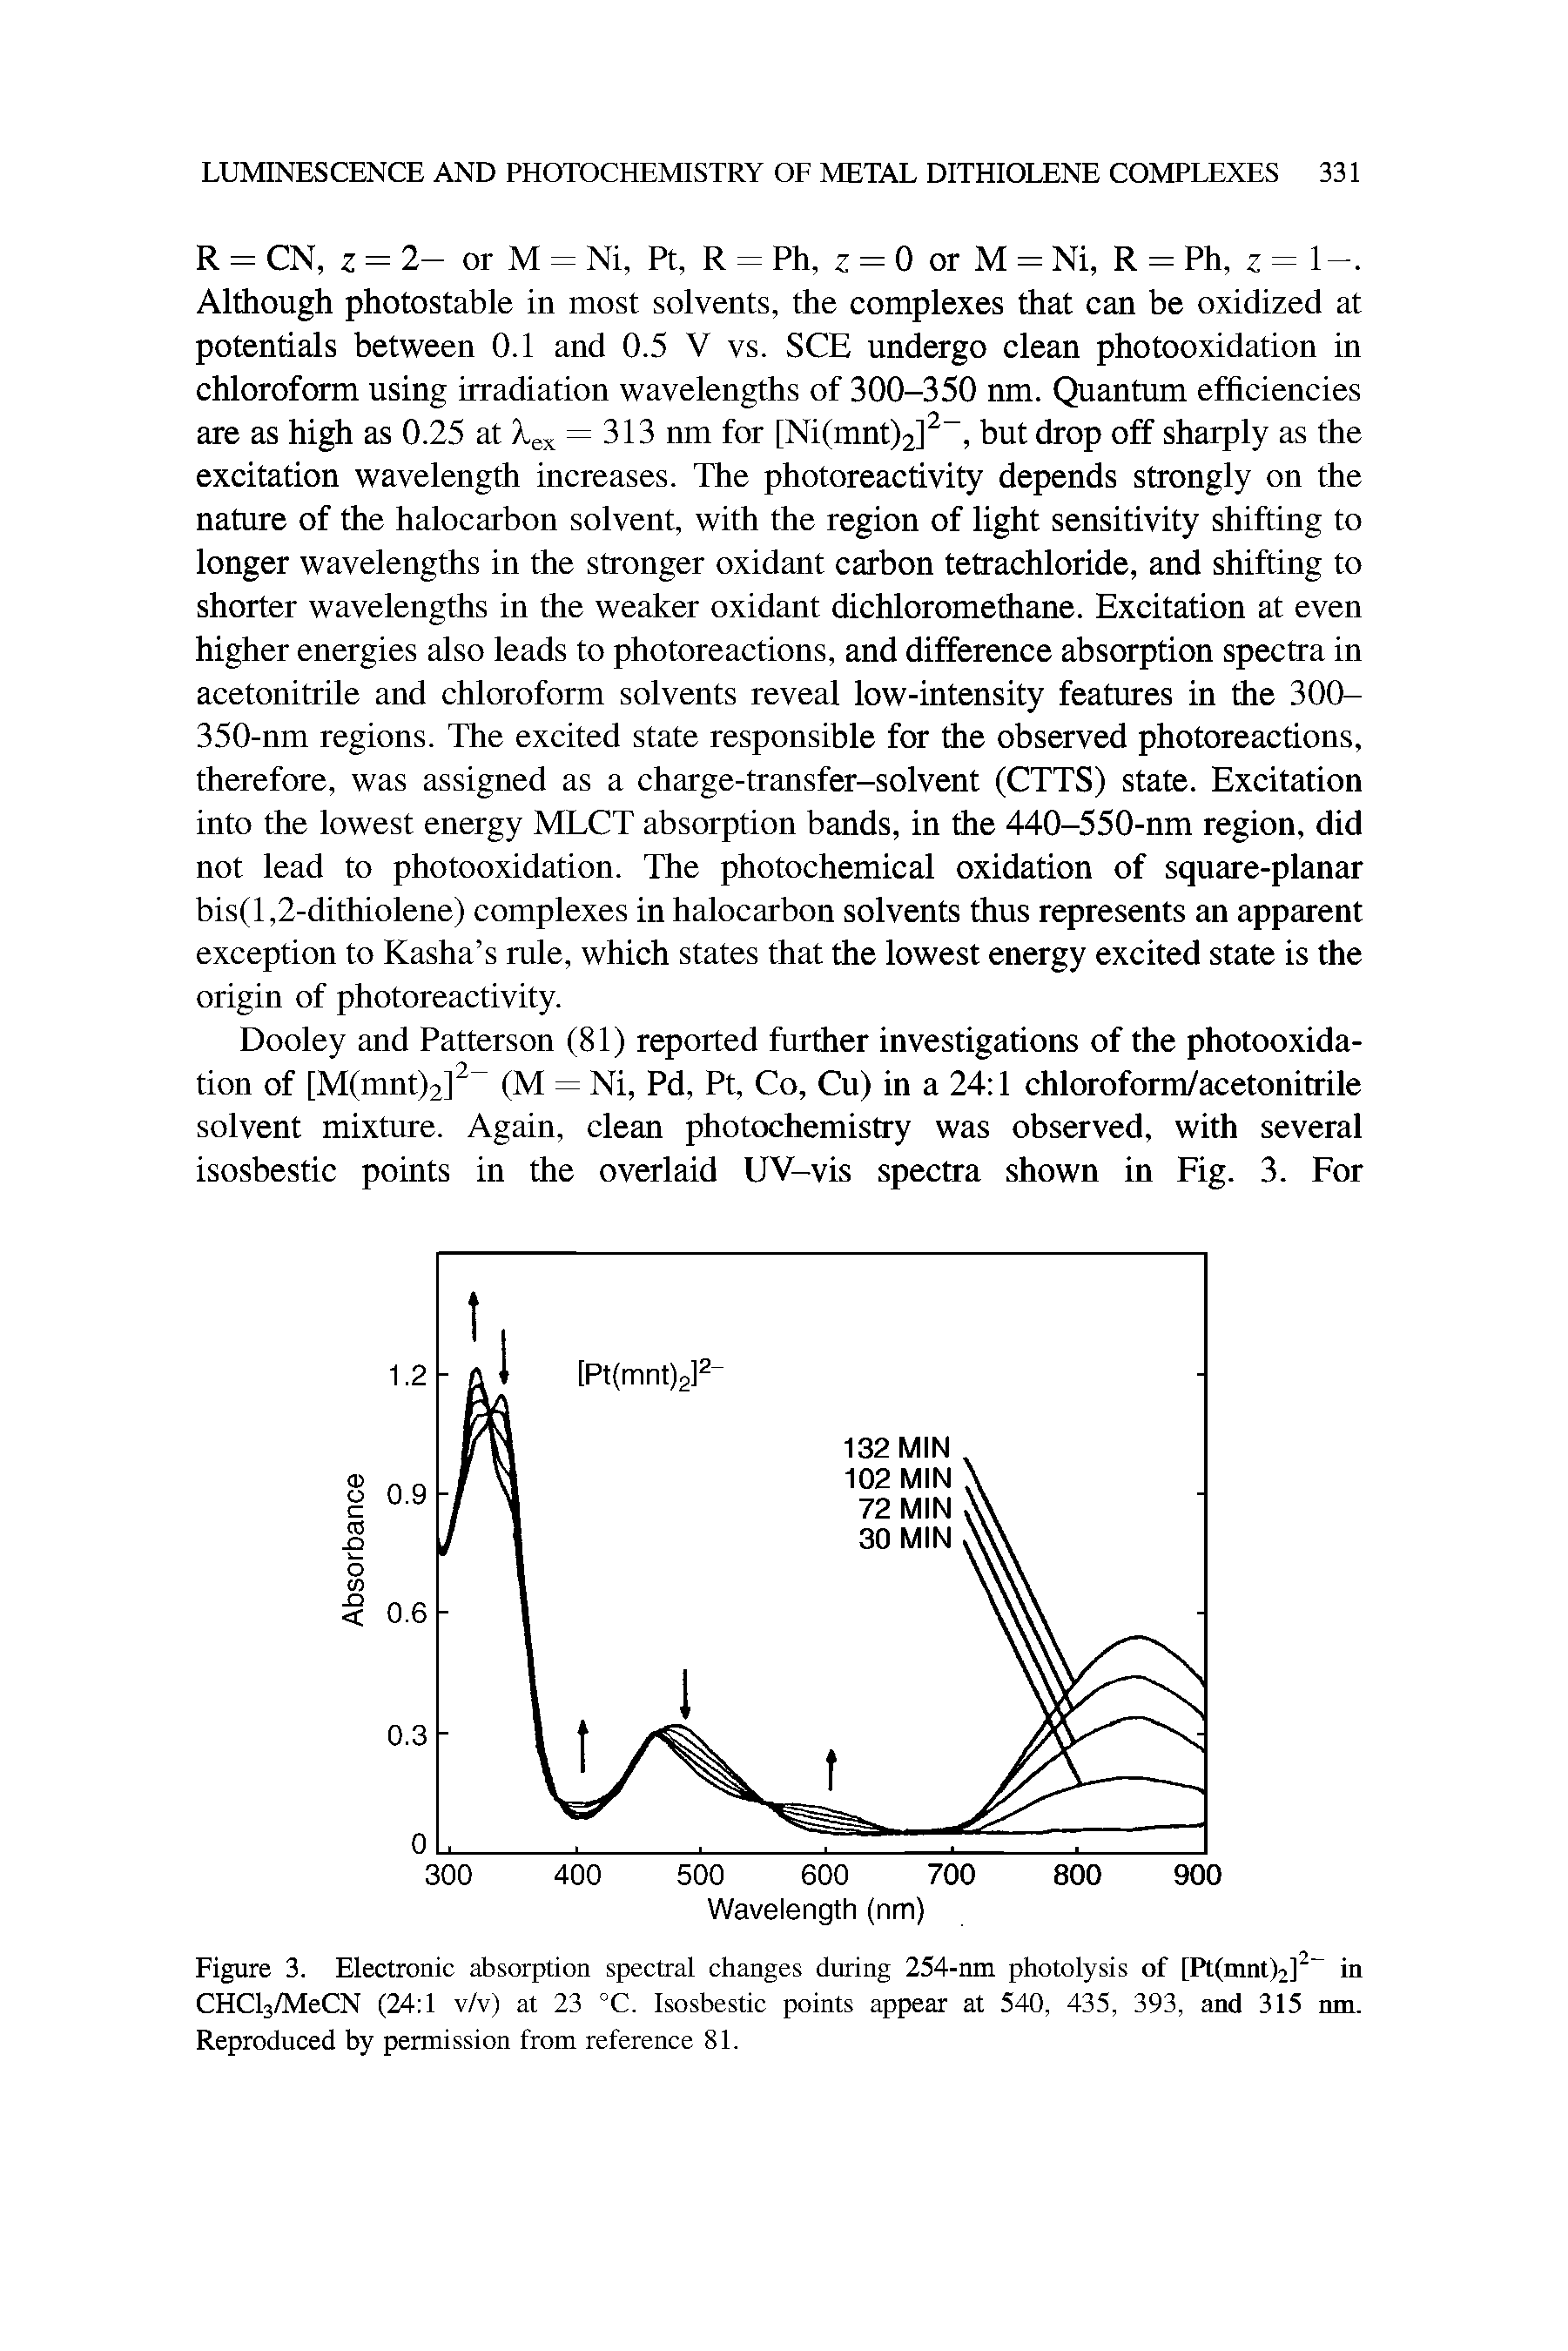 Figure 3. Electronic absorption spectral changes during 254-nm photolysis of [PttmntF]2 in CHCl3/MeCN (24 1 v/v) at 23 °C. Isosbestic points appear at 540, 435, 393, and 315 nm. Reproduced by permission from reference 81.